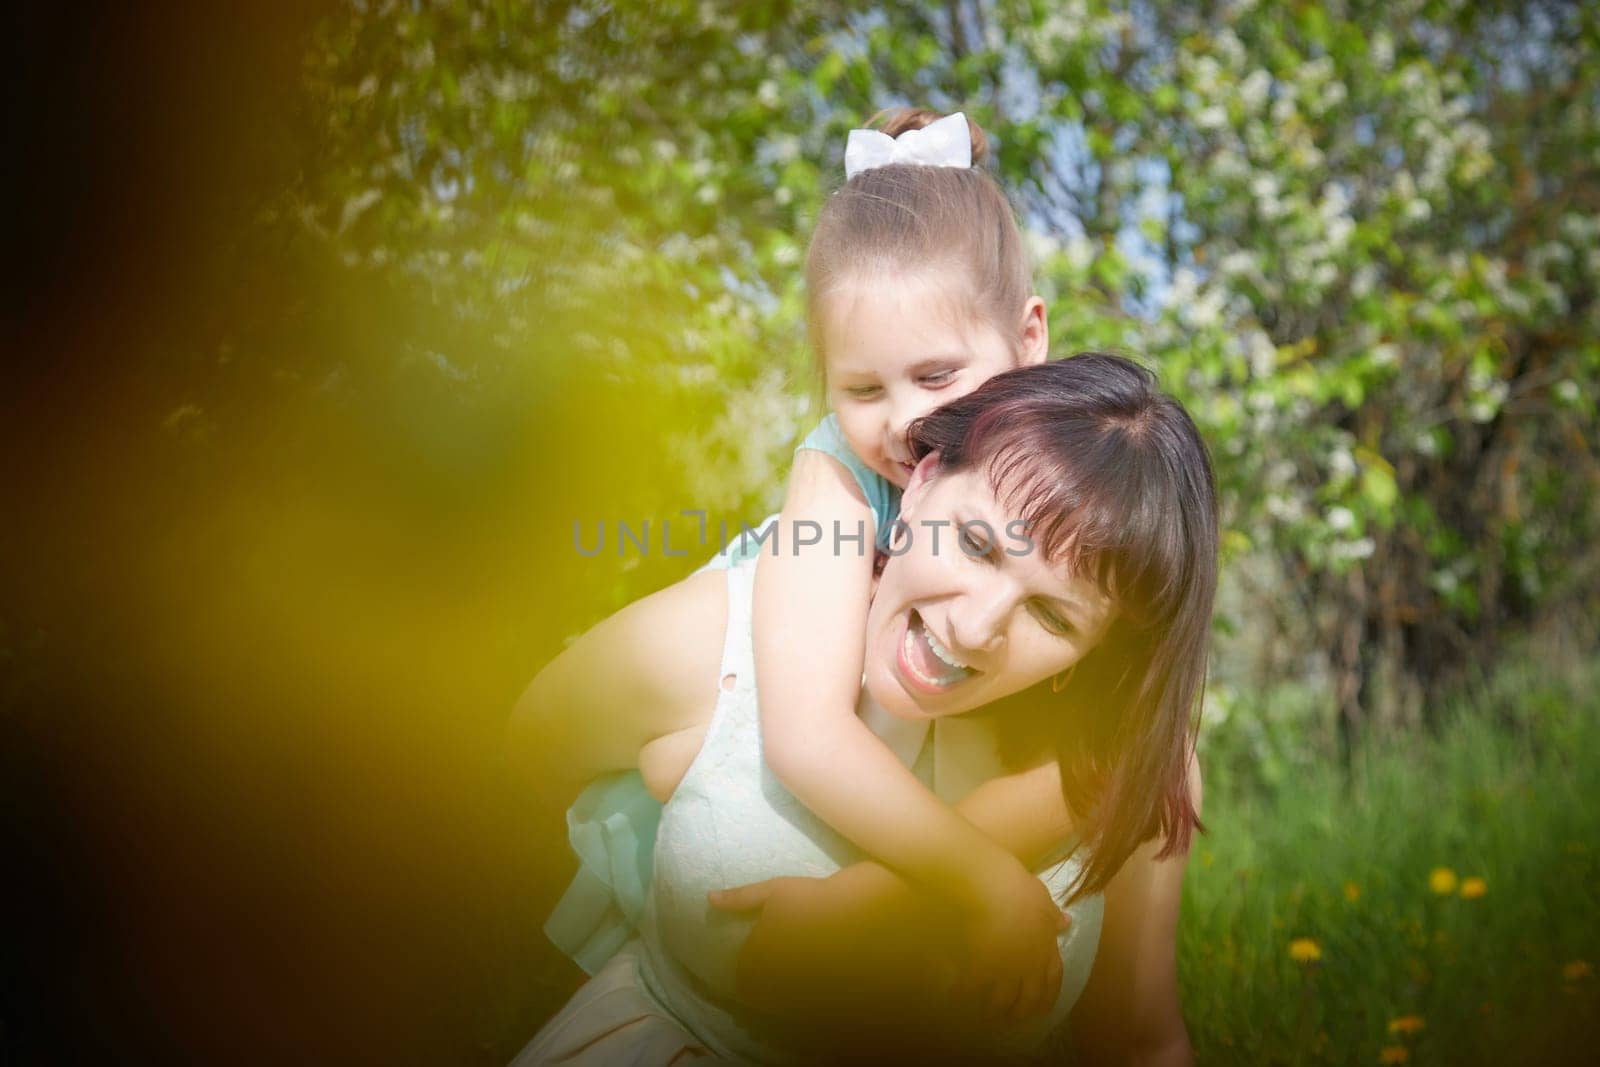 Happy mother and daughter enjoying rest, playing and fun on nature on a green lawn with dandelions and blooming apple tree on background. Woman and girl resting outdoors in summer and spring day